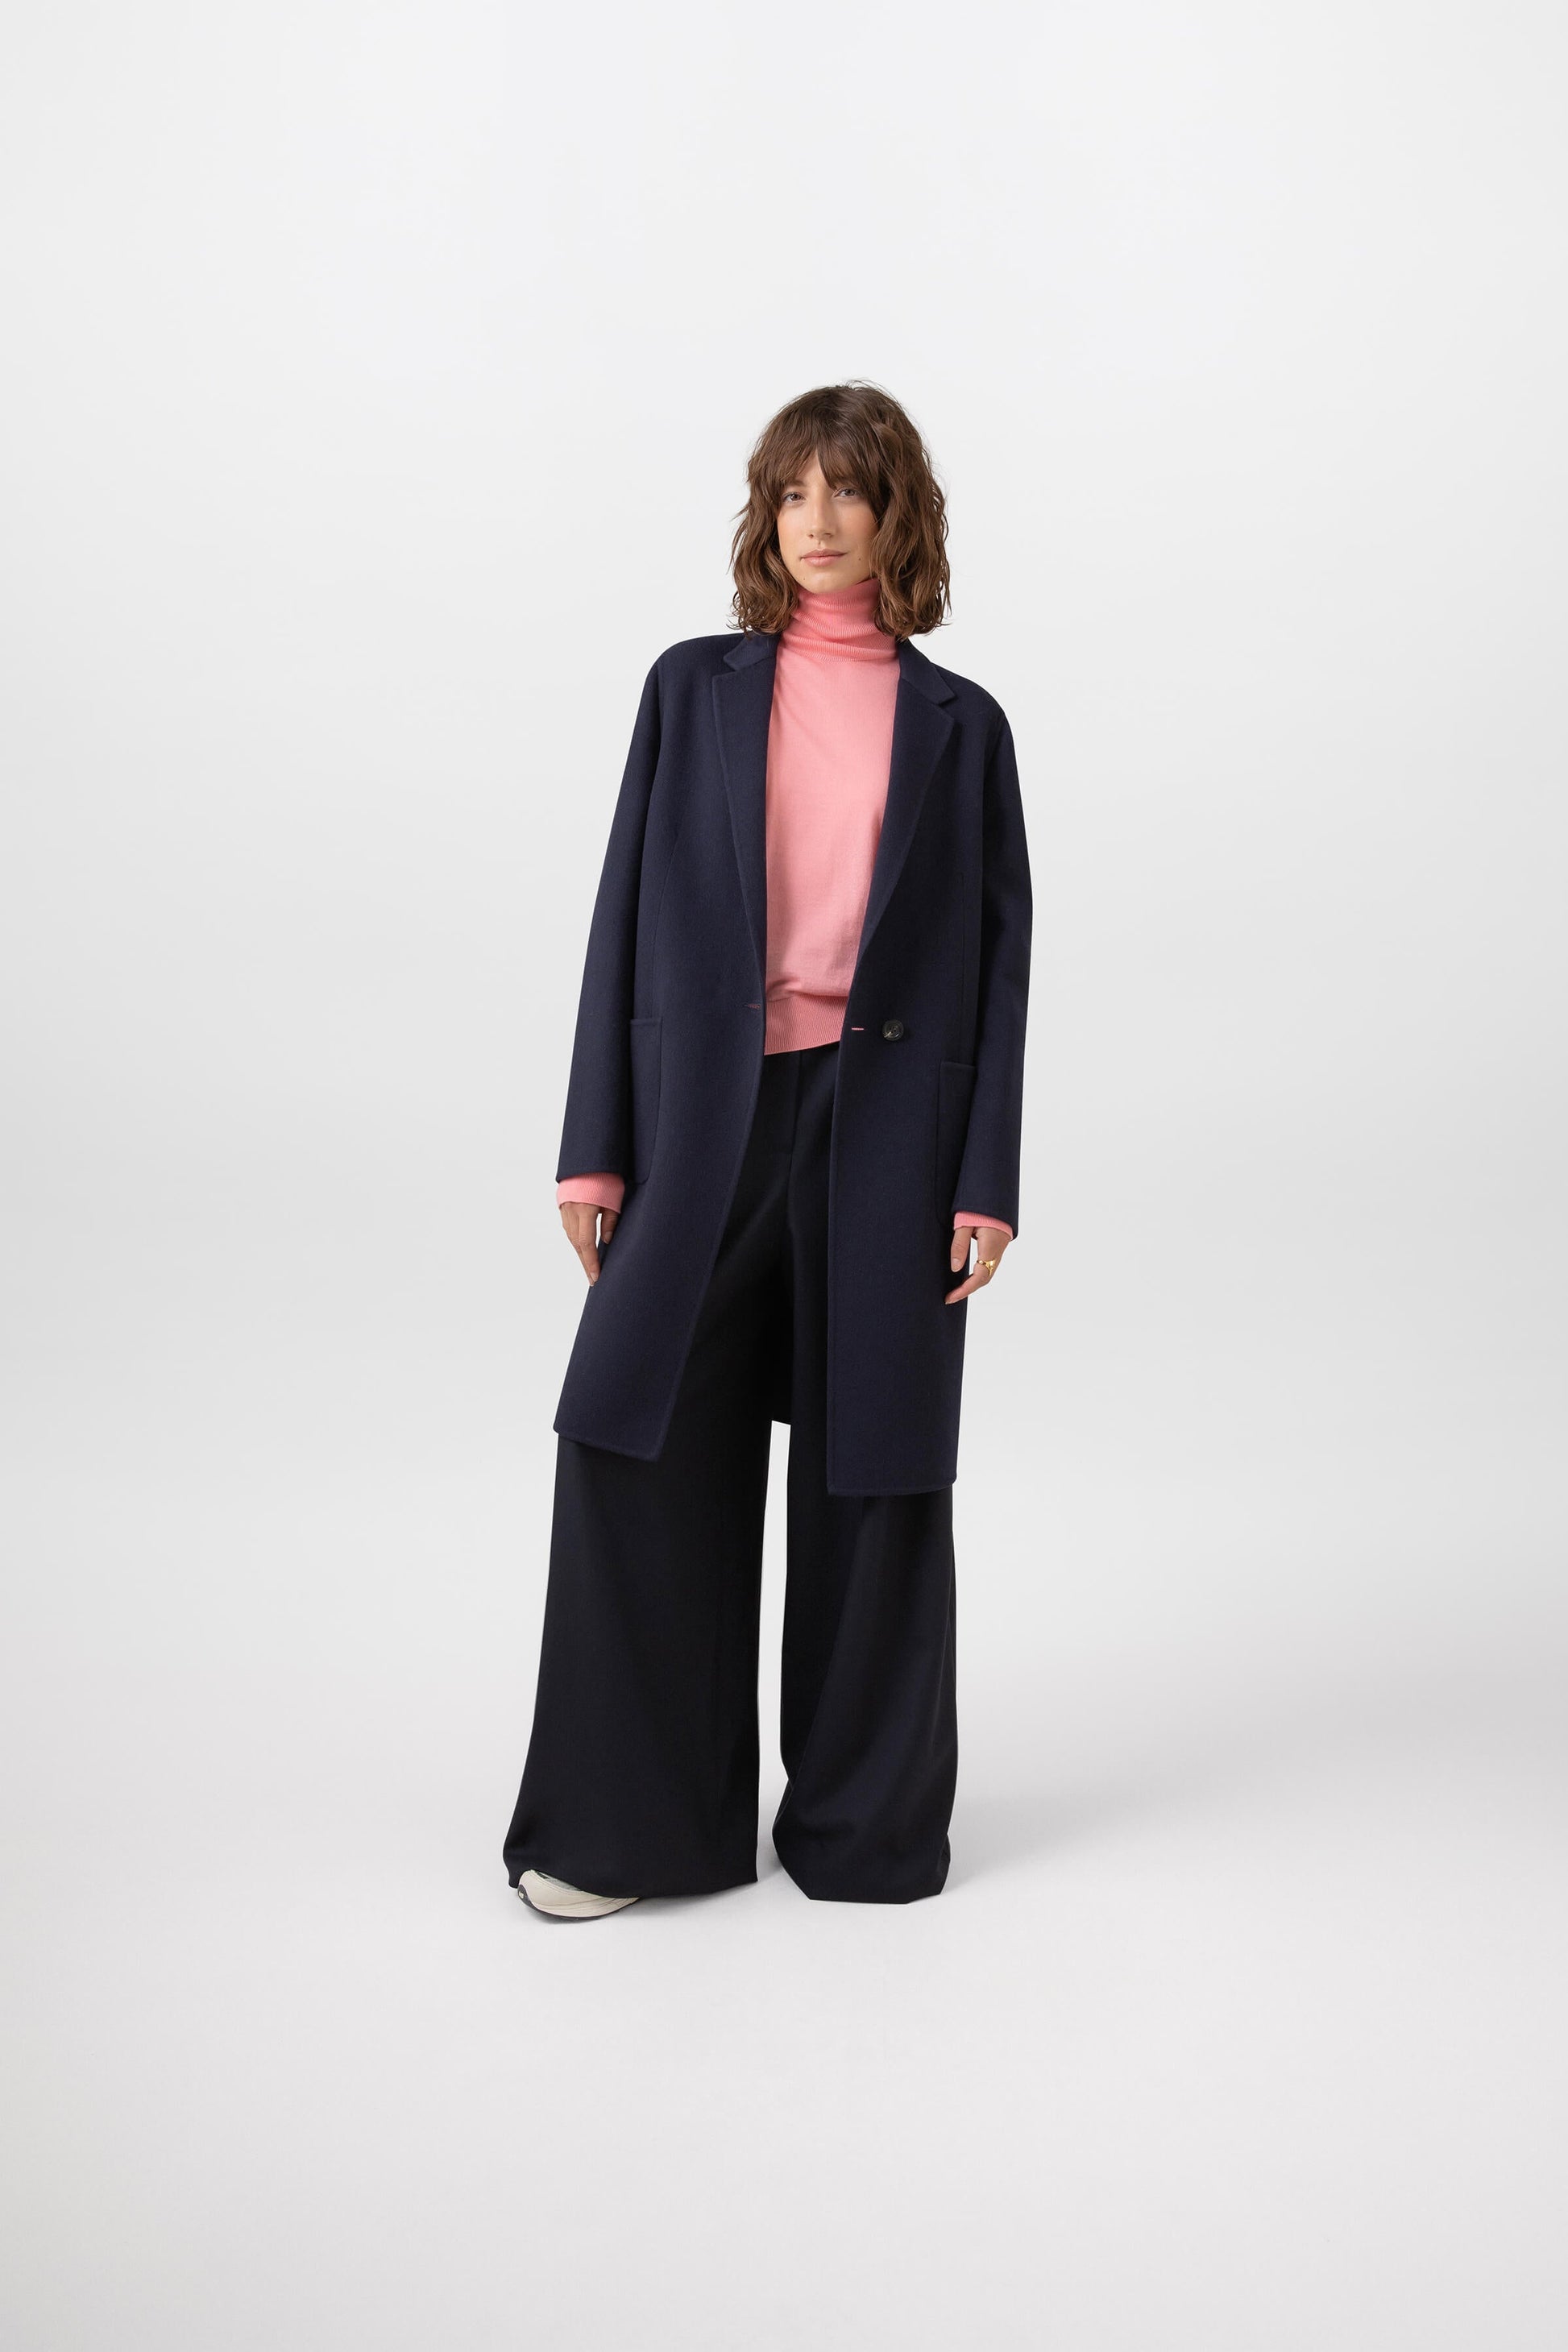 Johnstons of Elgin Women's Cashmere Crombie Coat in Navy worn with a Sea Pink Merino Roll Neck on a white background TA000520RU7291